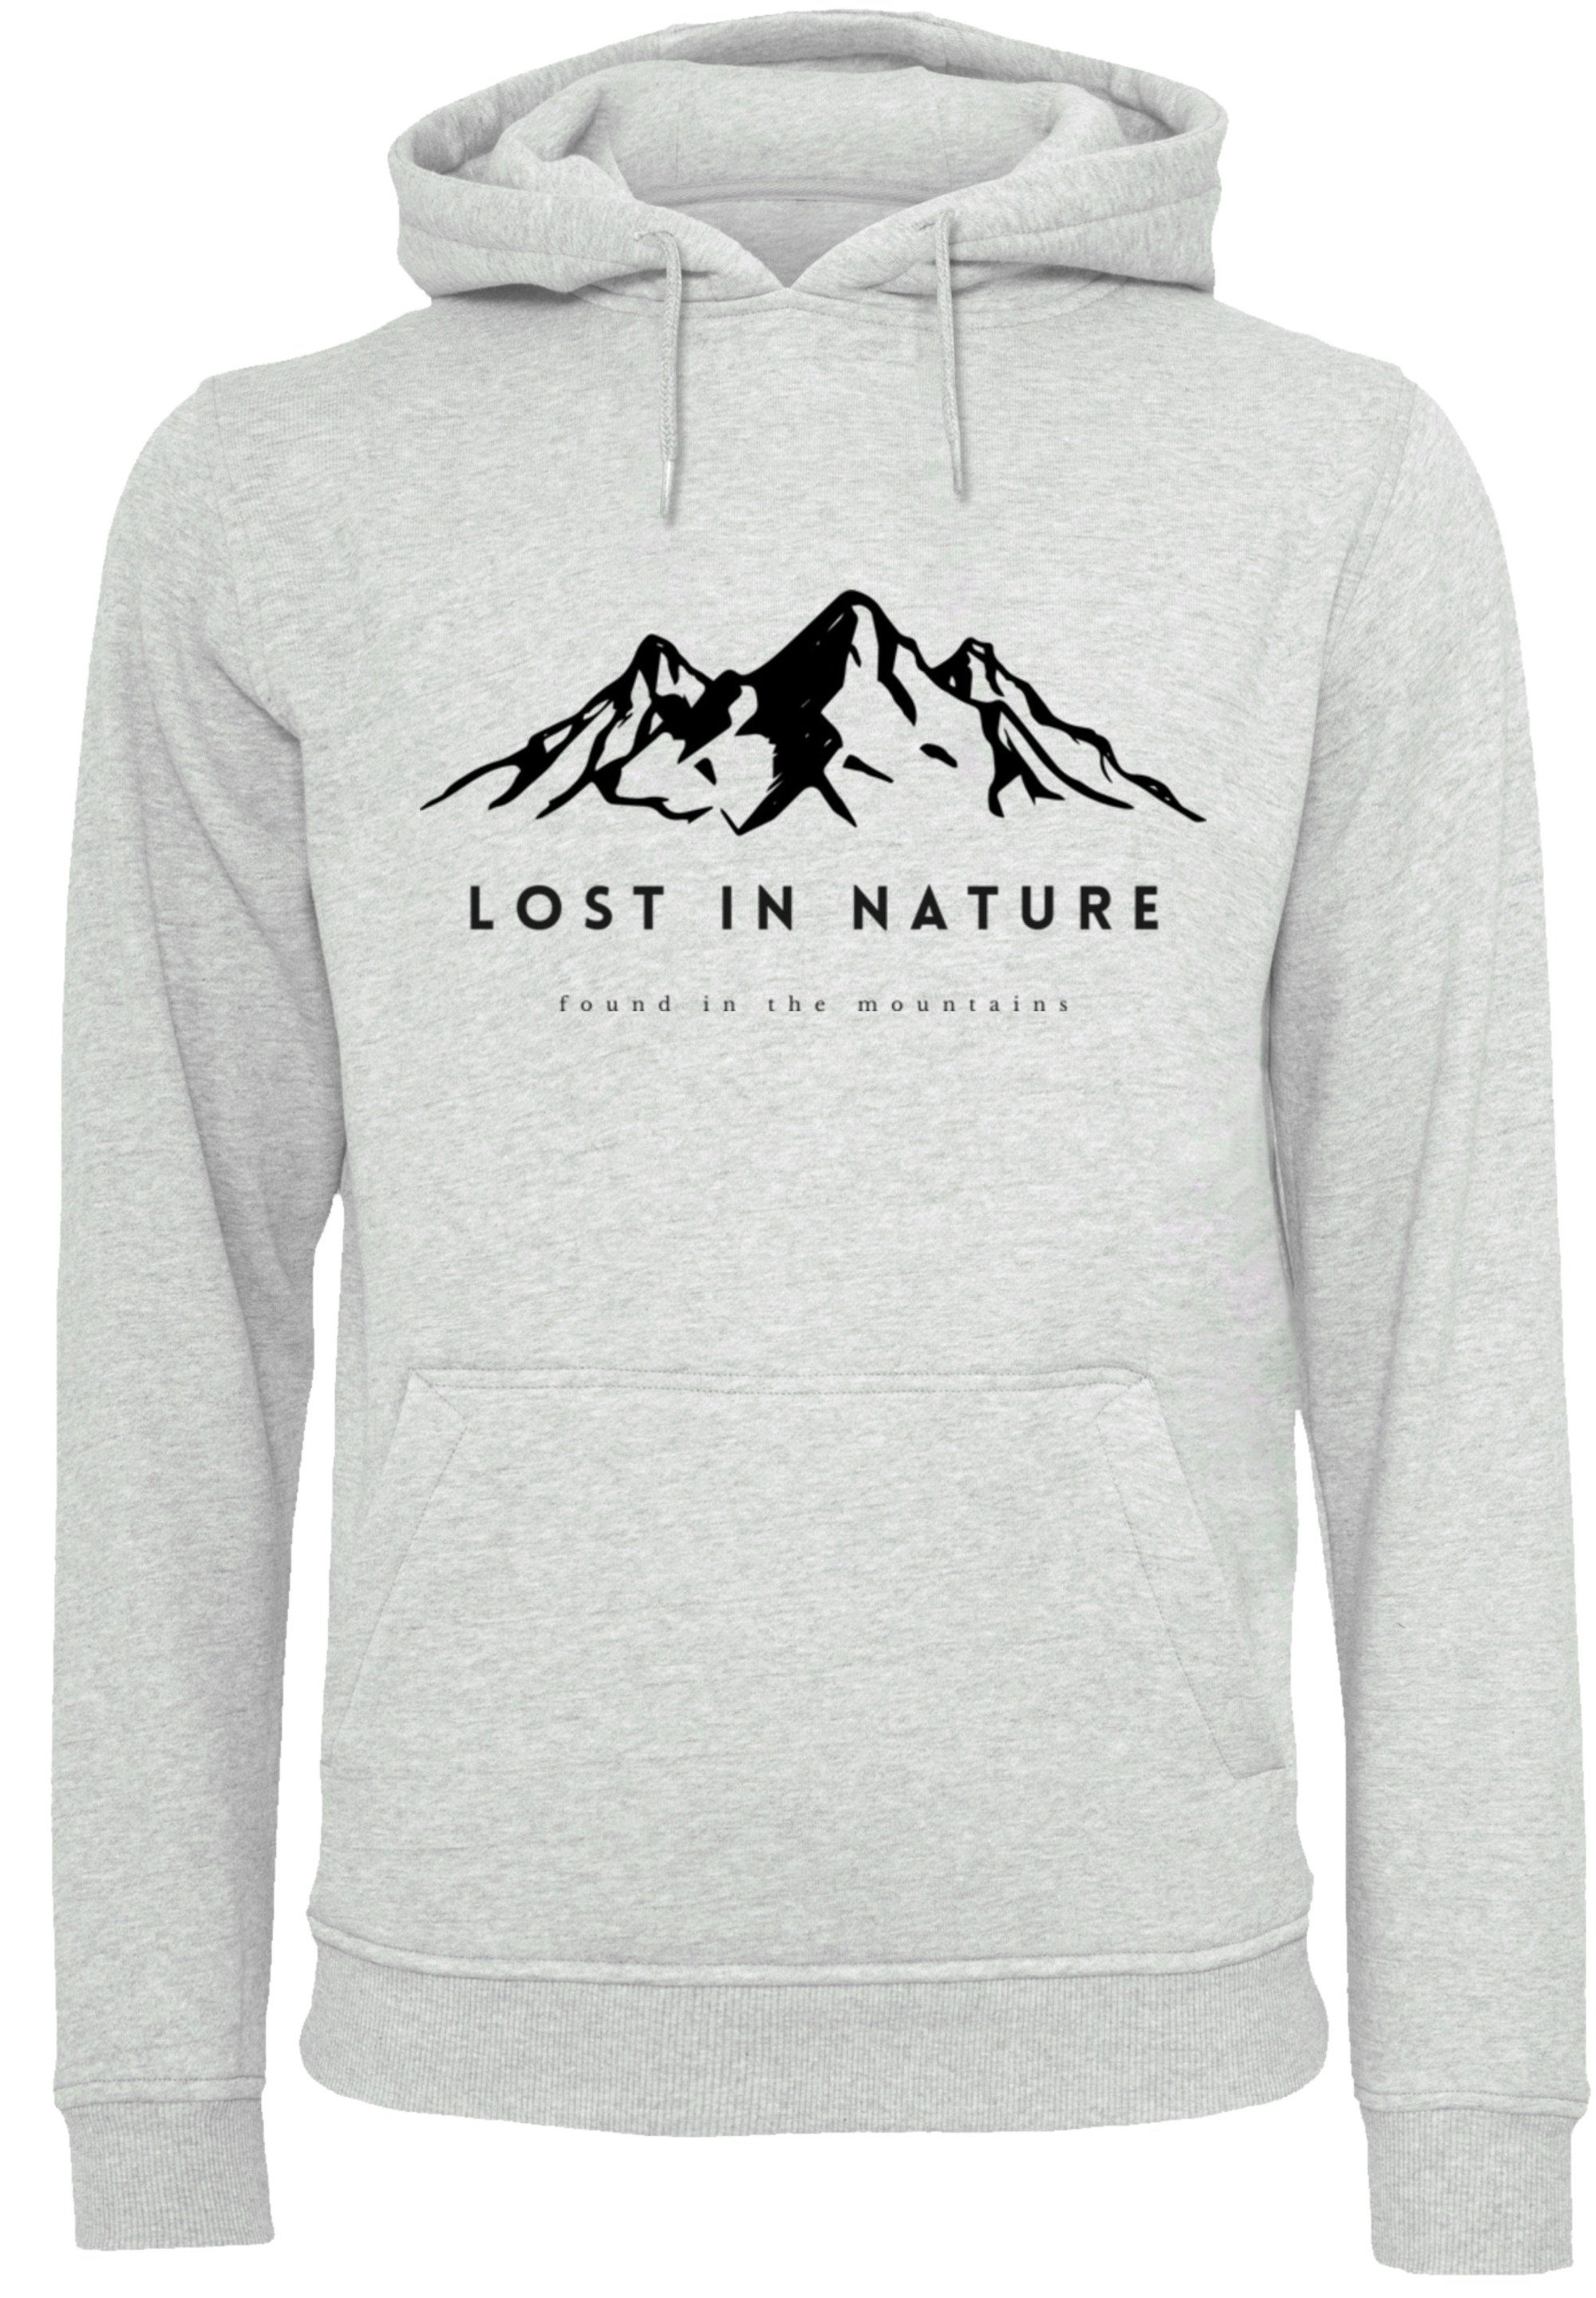 F4NT4STIC Kapuzenpullover Lost in nature Hoodie, Warm, Bequem heather grey